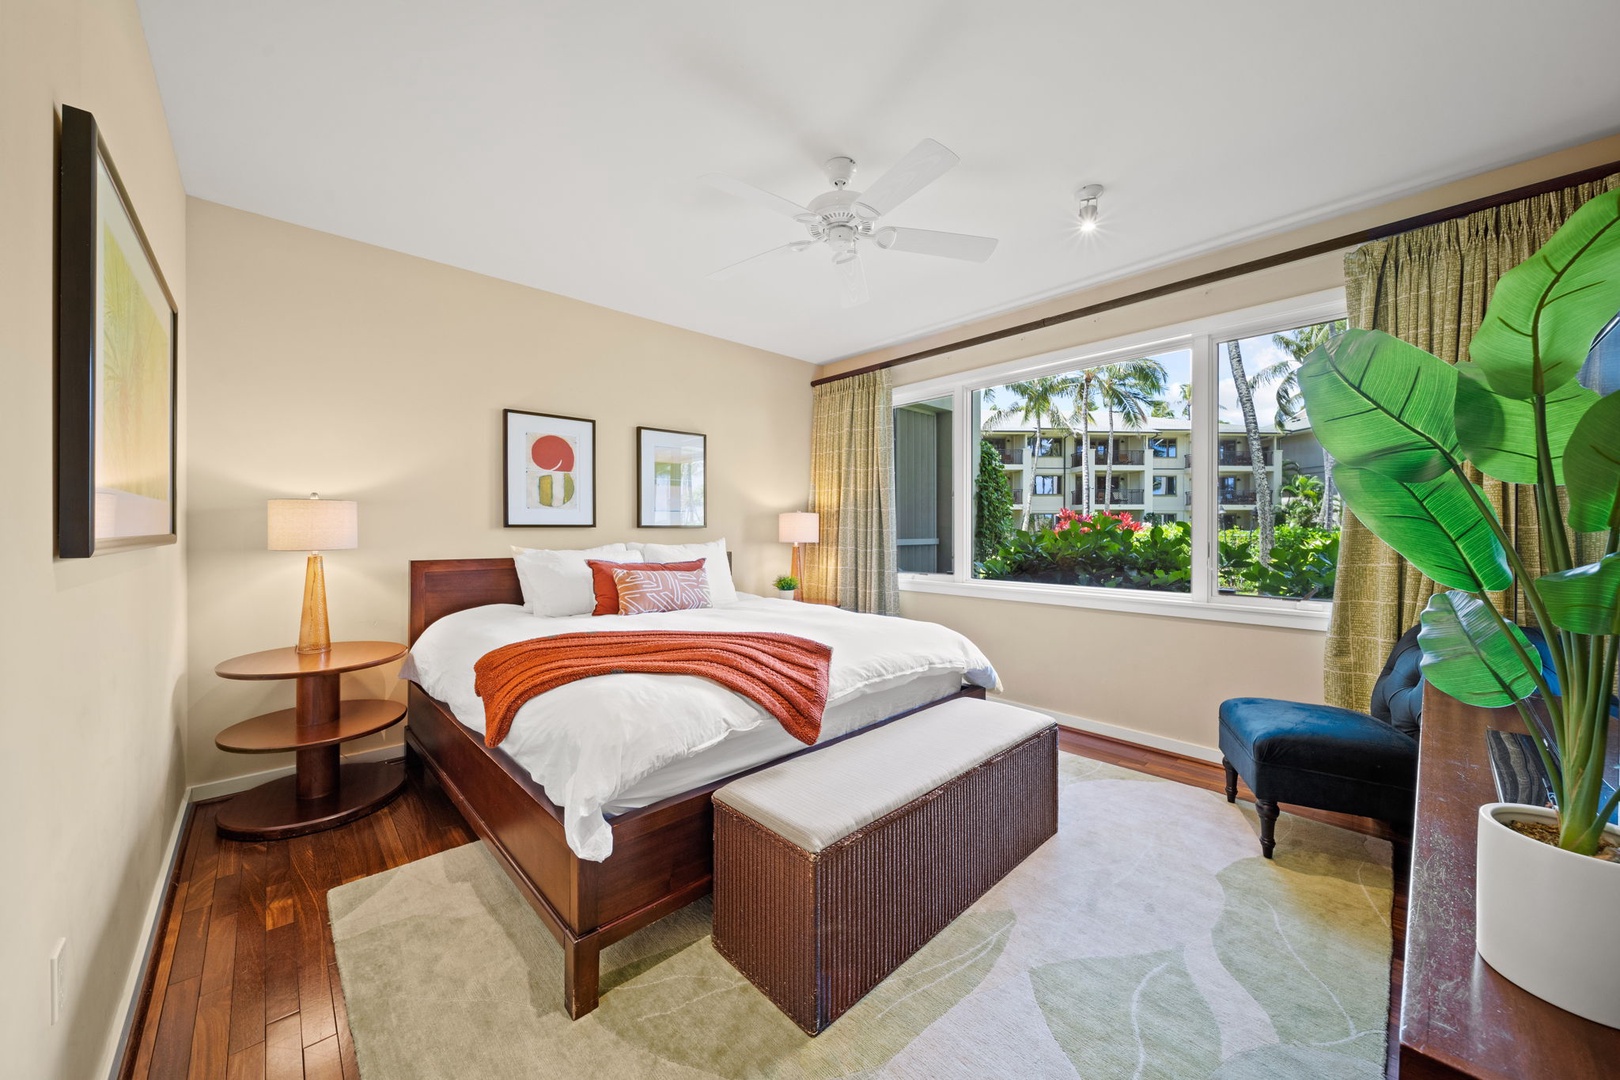 Kahuku Vacation Rentals, Turtle Bay Villas 114 - Primary Suite with garden views, A/C, and a ceiling fan